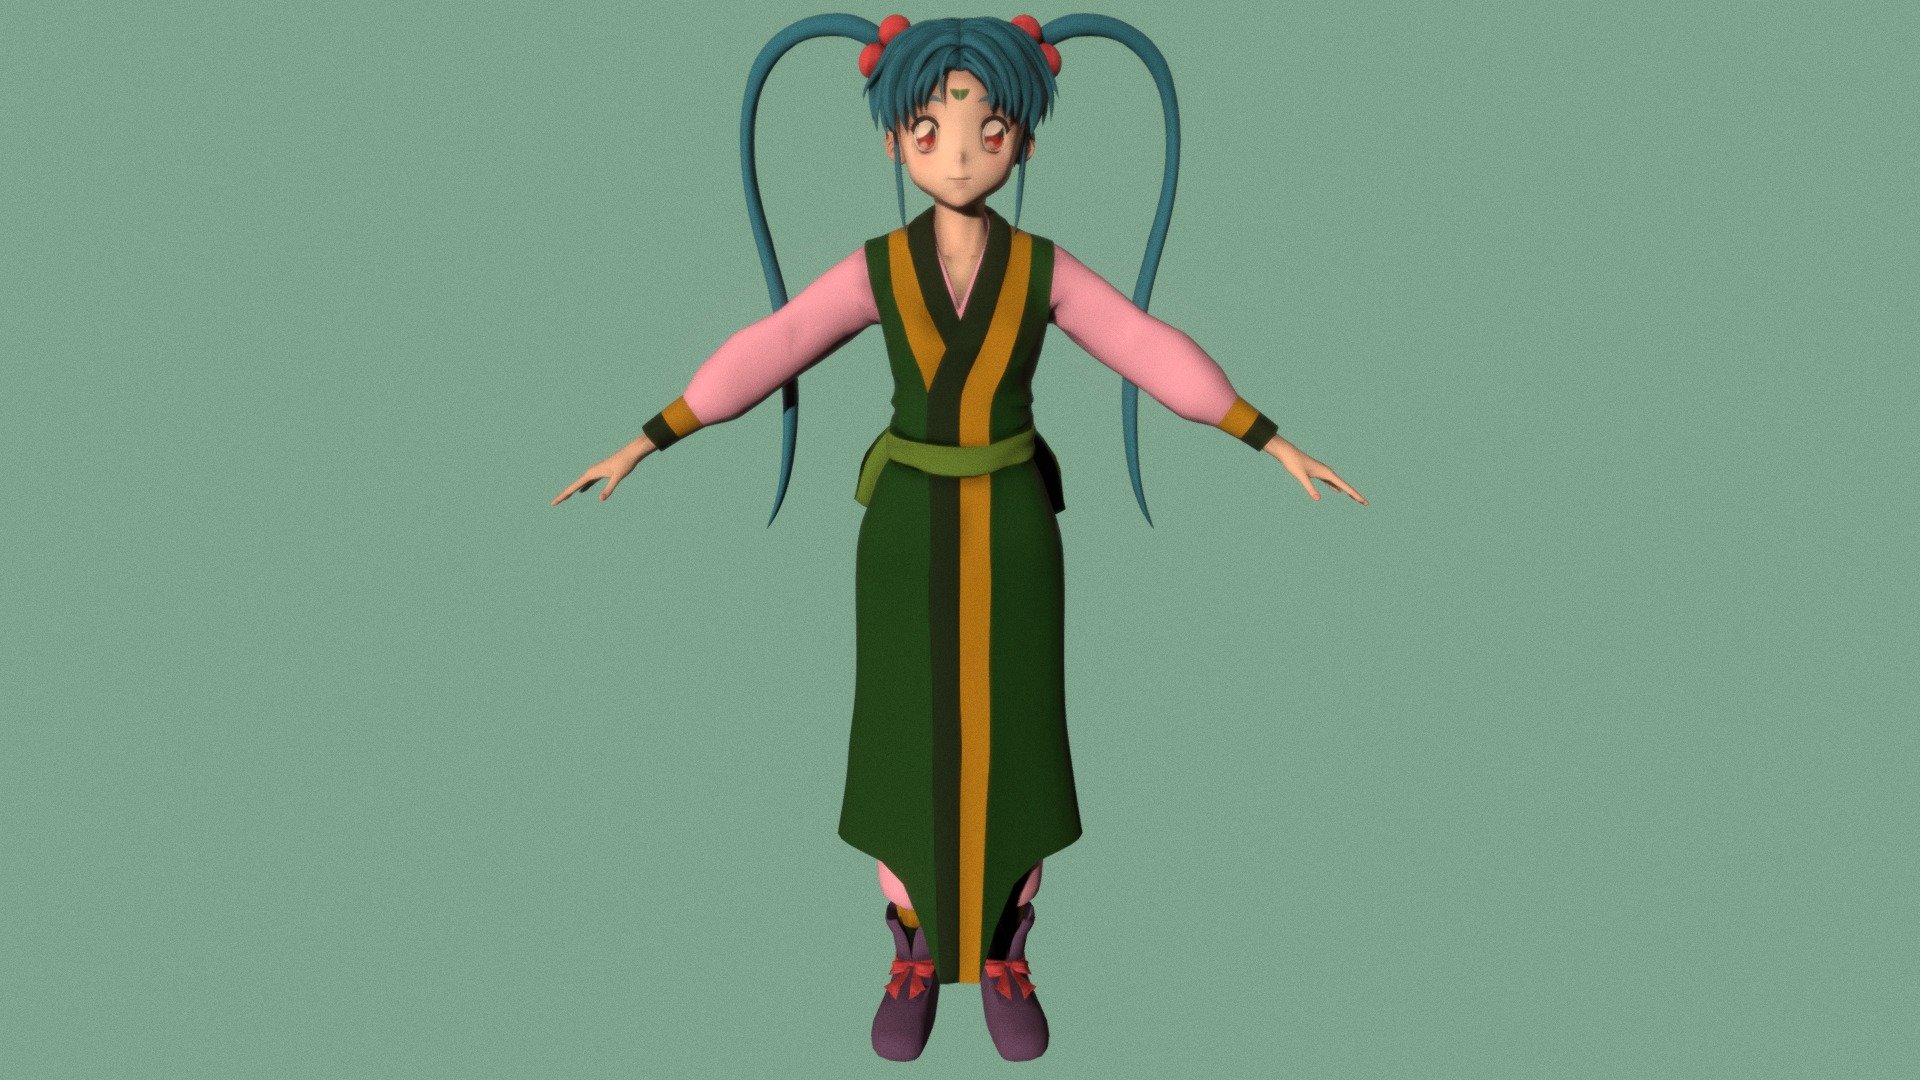 T-pose rigged model of anime girl Sasami Masaki Jurai (Tenchi Muyo).

Body and clothings are rigged and skinned by 3ds Max CAT system.

Eye direction and facial animation controlled by Morpher modifier / Shape Keys / Blendshape.

This product include .FBX (ver. 7200) and .MAX (ver. 2010) files.

3ds Max version is turbosmoothed to give a high quality render (as you can see here).

Original main body mesh have ~7.000 polys.

This 3D model may need some tweaking to adapt the rig system to games engine and other platforms.

I support convert model to various file formats (the rig data will be lost in this process): 3DS; AI; ASE; DAE; DWF; DWG; DXF; FLT; HTR; IGS; M3G; MQO; OBJ; SAT; STL; W3D; WRL; X.

You can buy all of my models in one pack to save cost: https://sketchfab.com/3d-models/all-of-my-anime-girls-c5a56156994e4193b9e8fa21a3b8360b

And I can make commission models.

If you have any questions, please leave a comment or contact me via my email 3d.eden.project@gmail.com 3d model